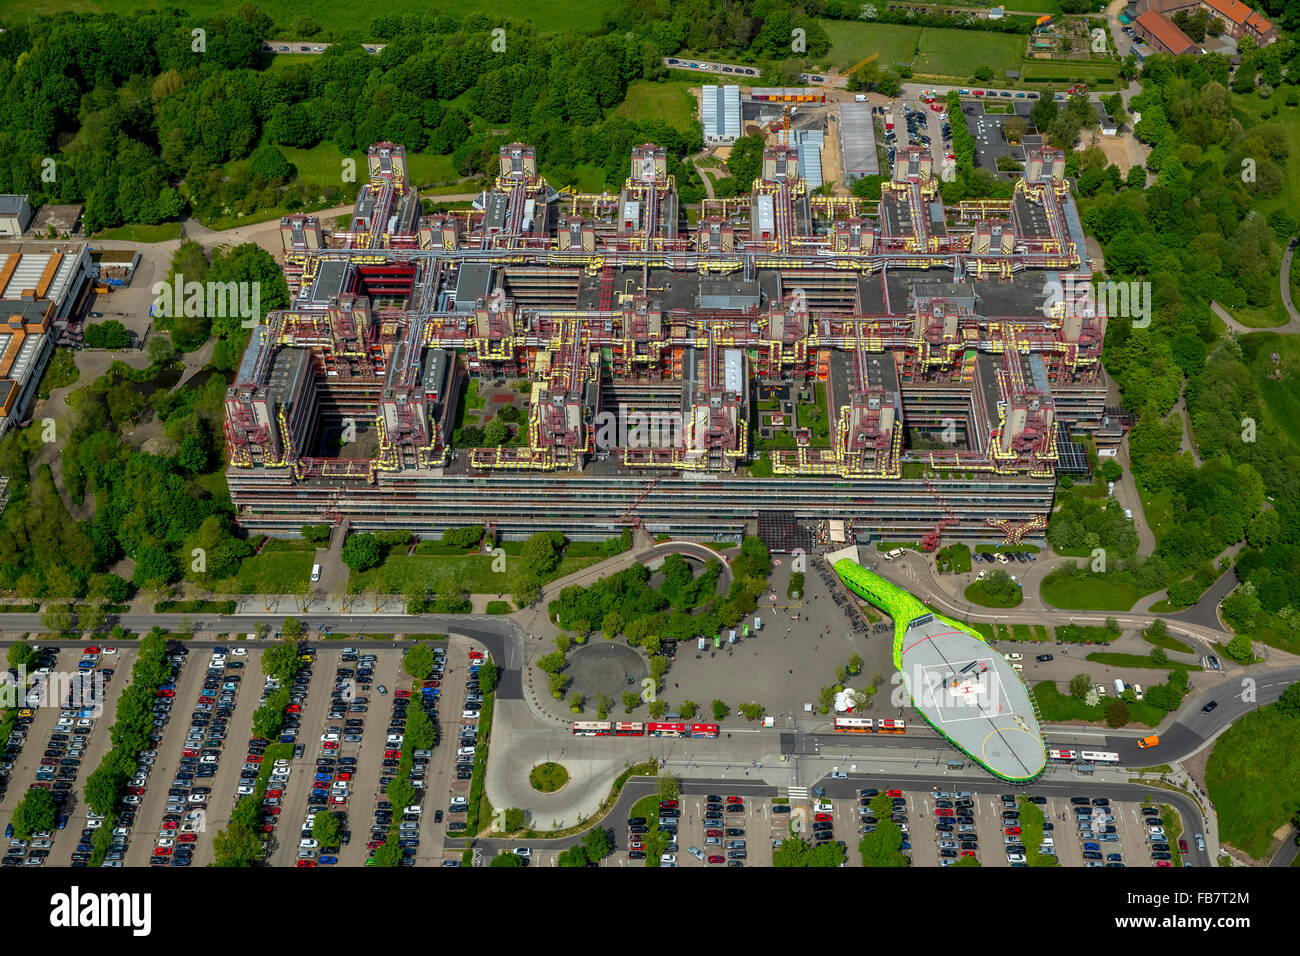 Aerial view, University Hospital RWTH Aachen, University Hospital Aachen with helipad, extravagant helipad with SAR helicopter, Stock Photo